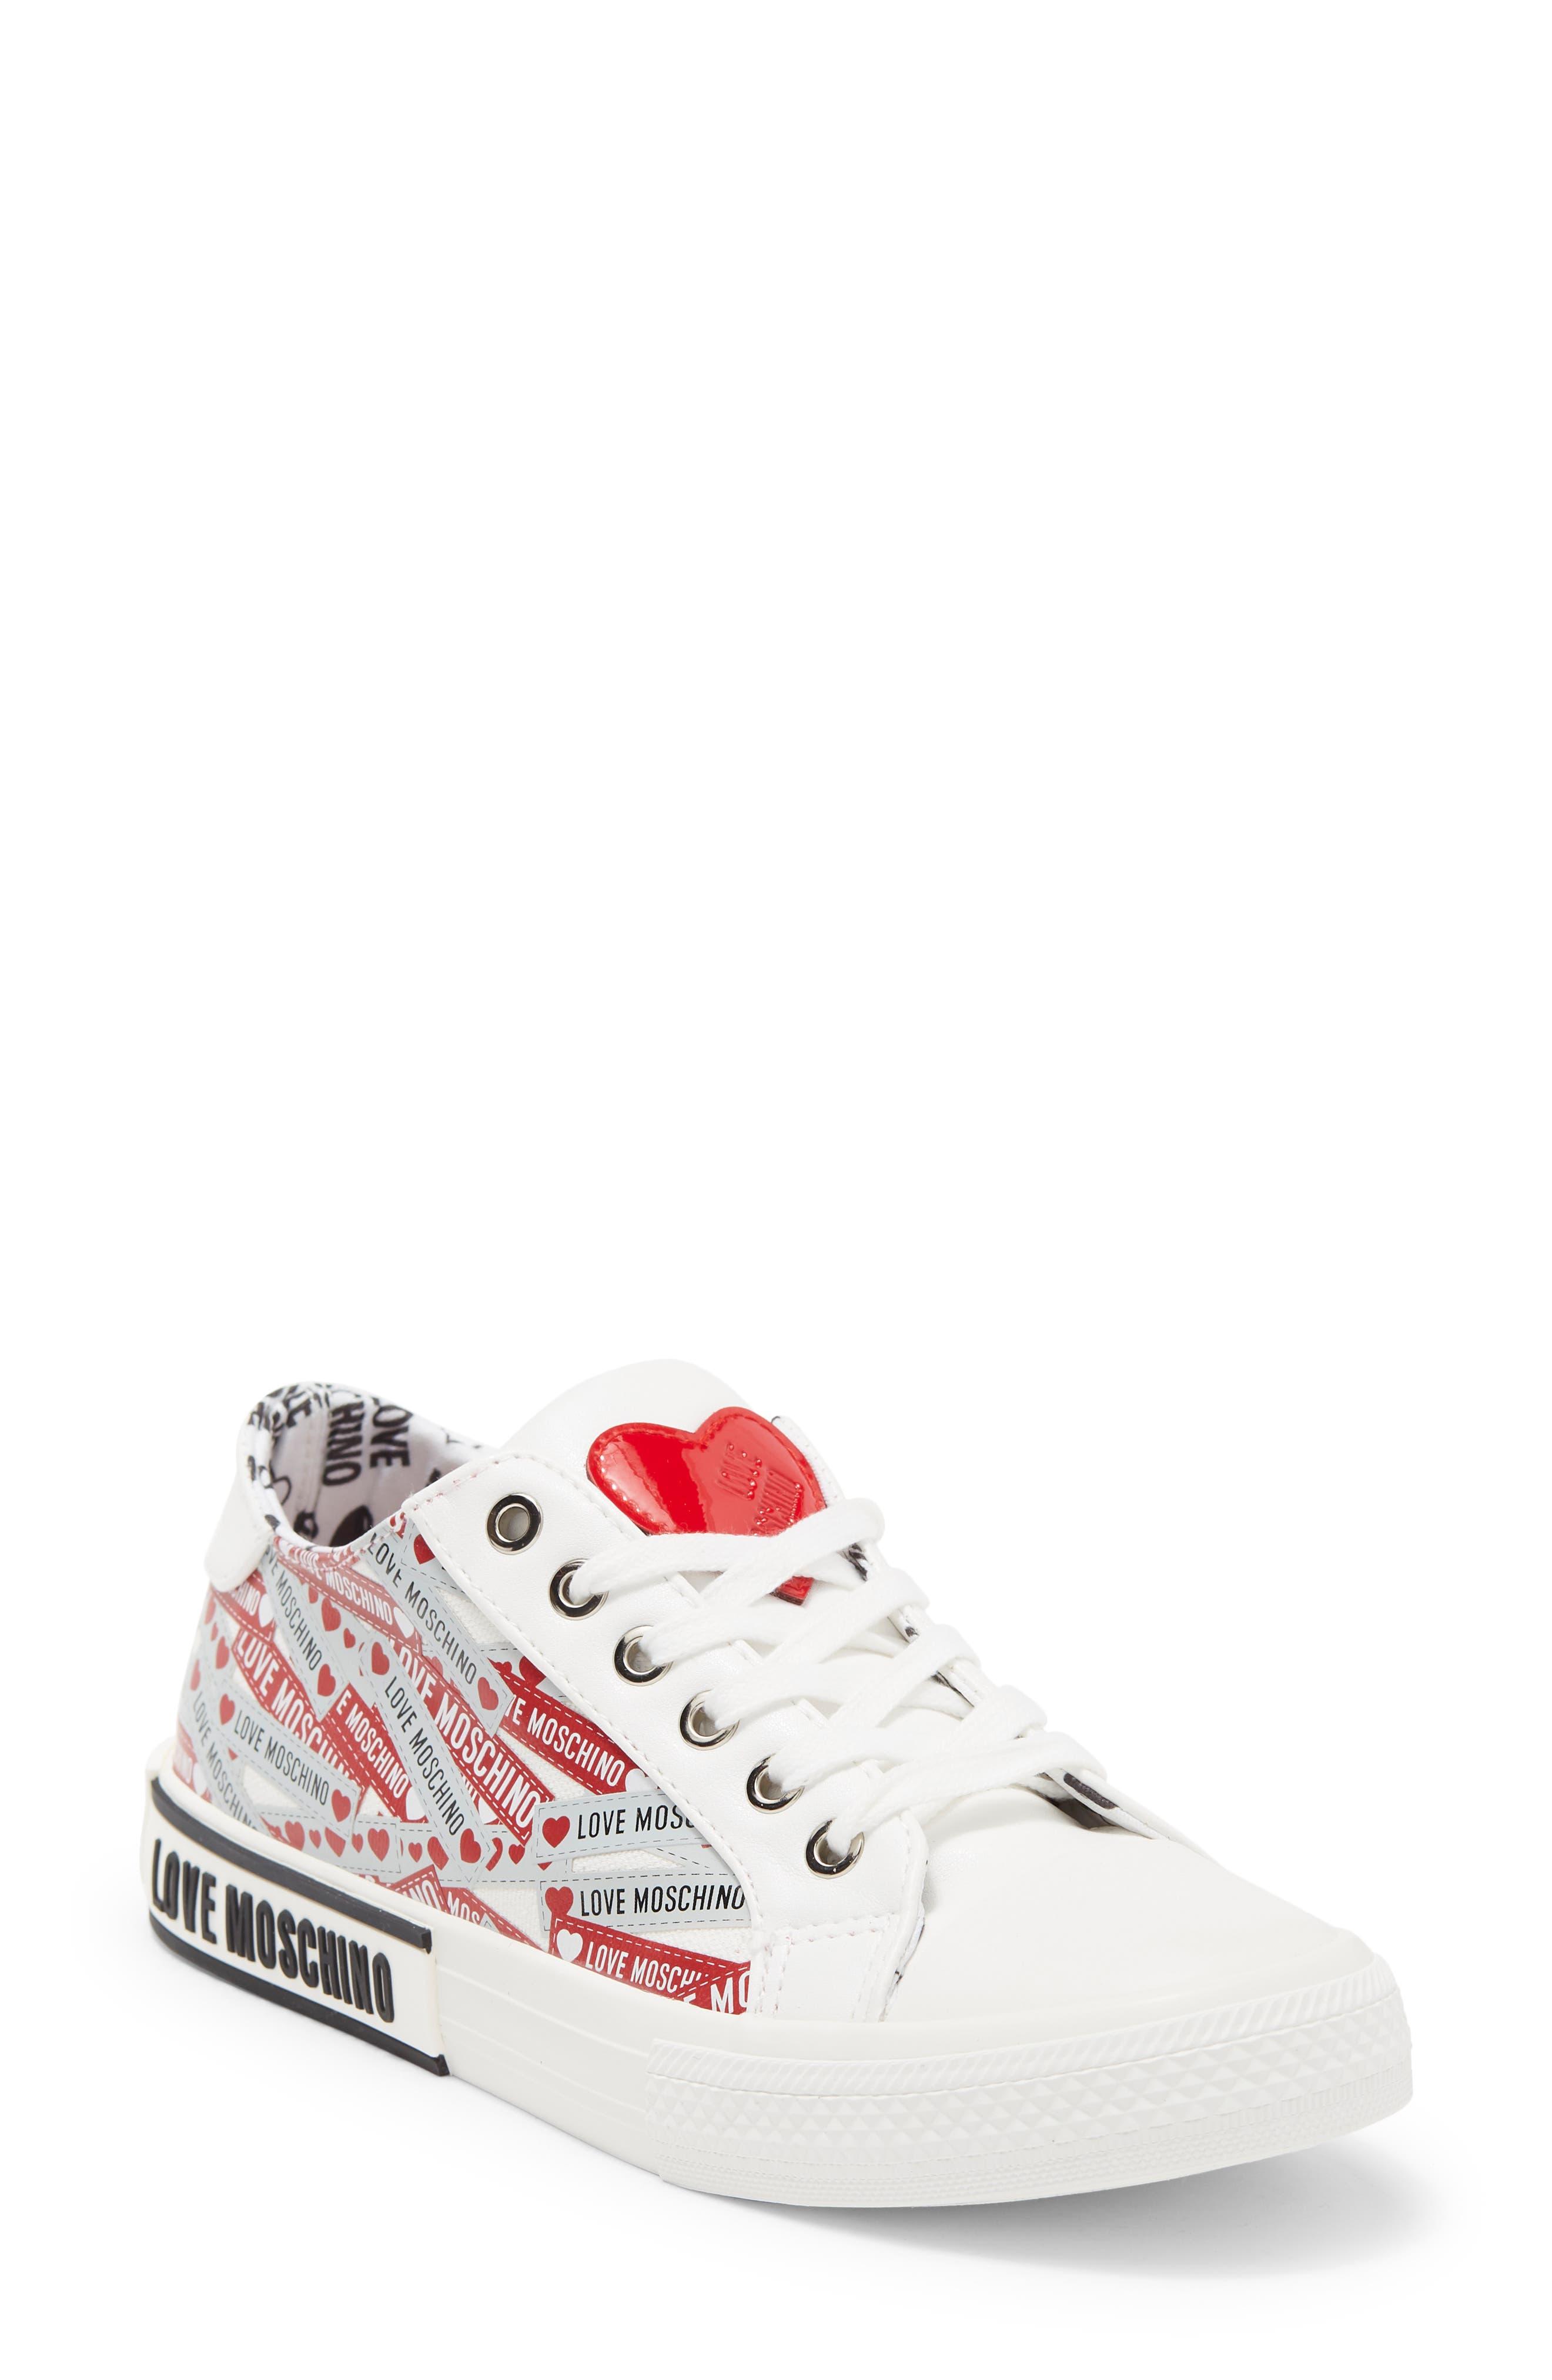 Love Moschino Logo Sneaker In Bianco At Nordstrom Rack in White | Lyst